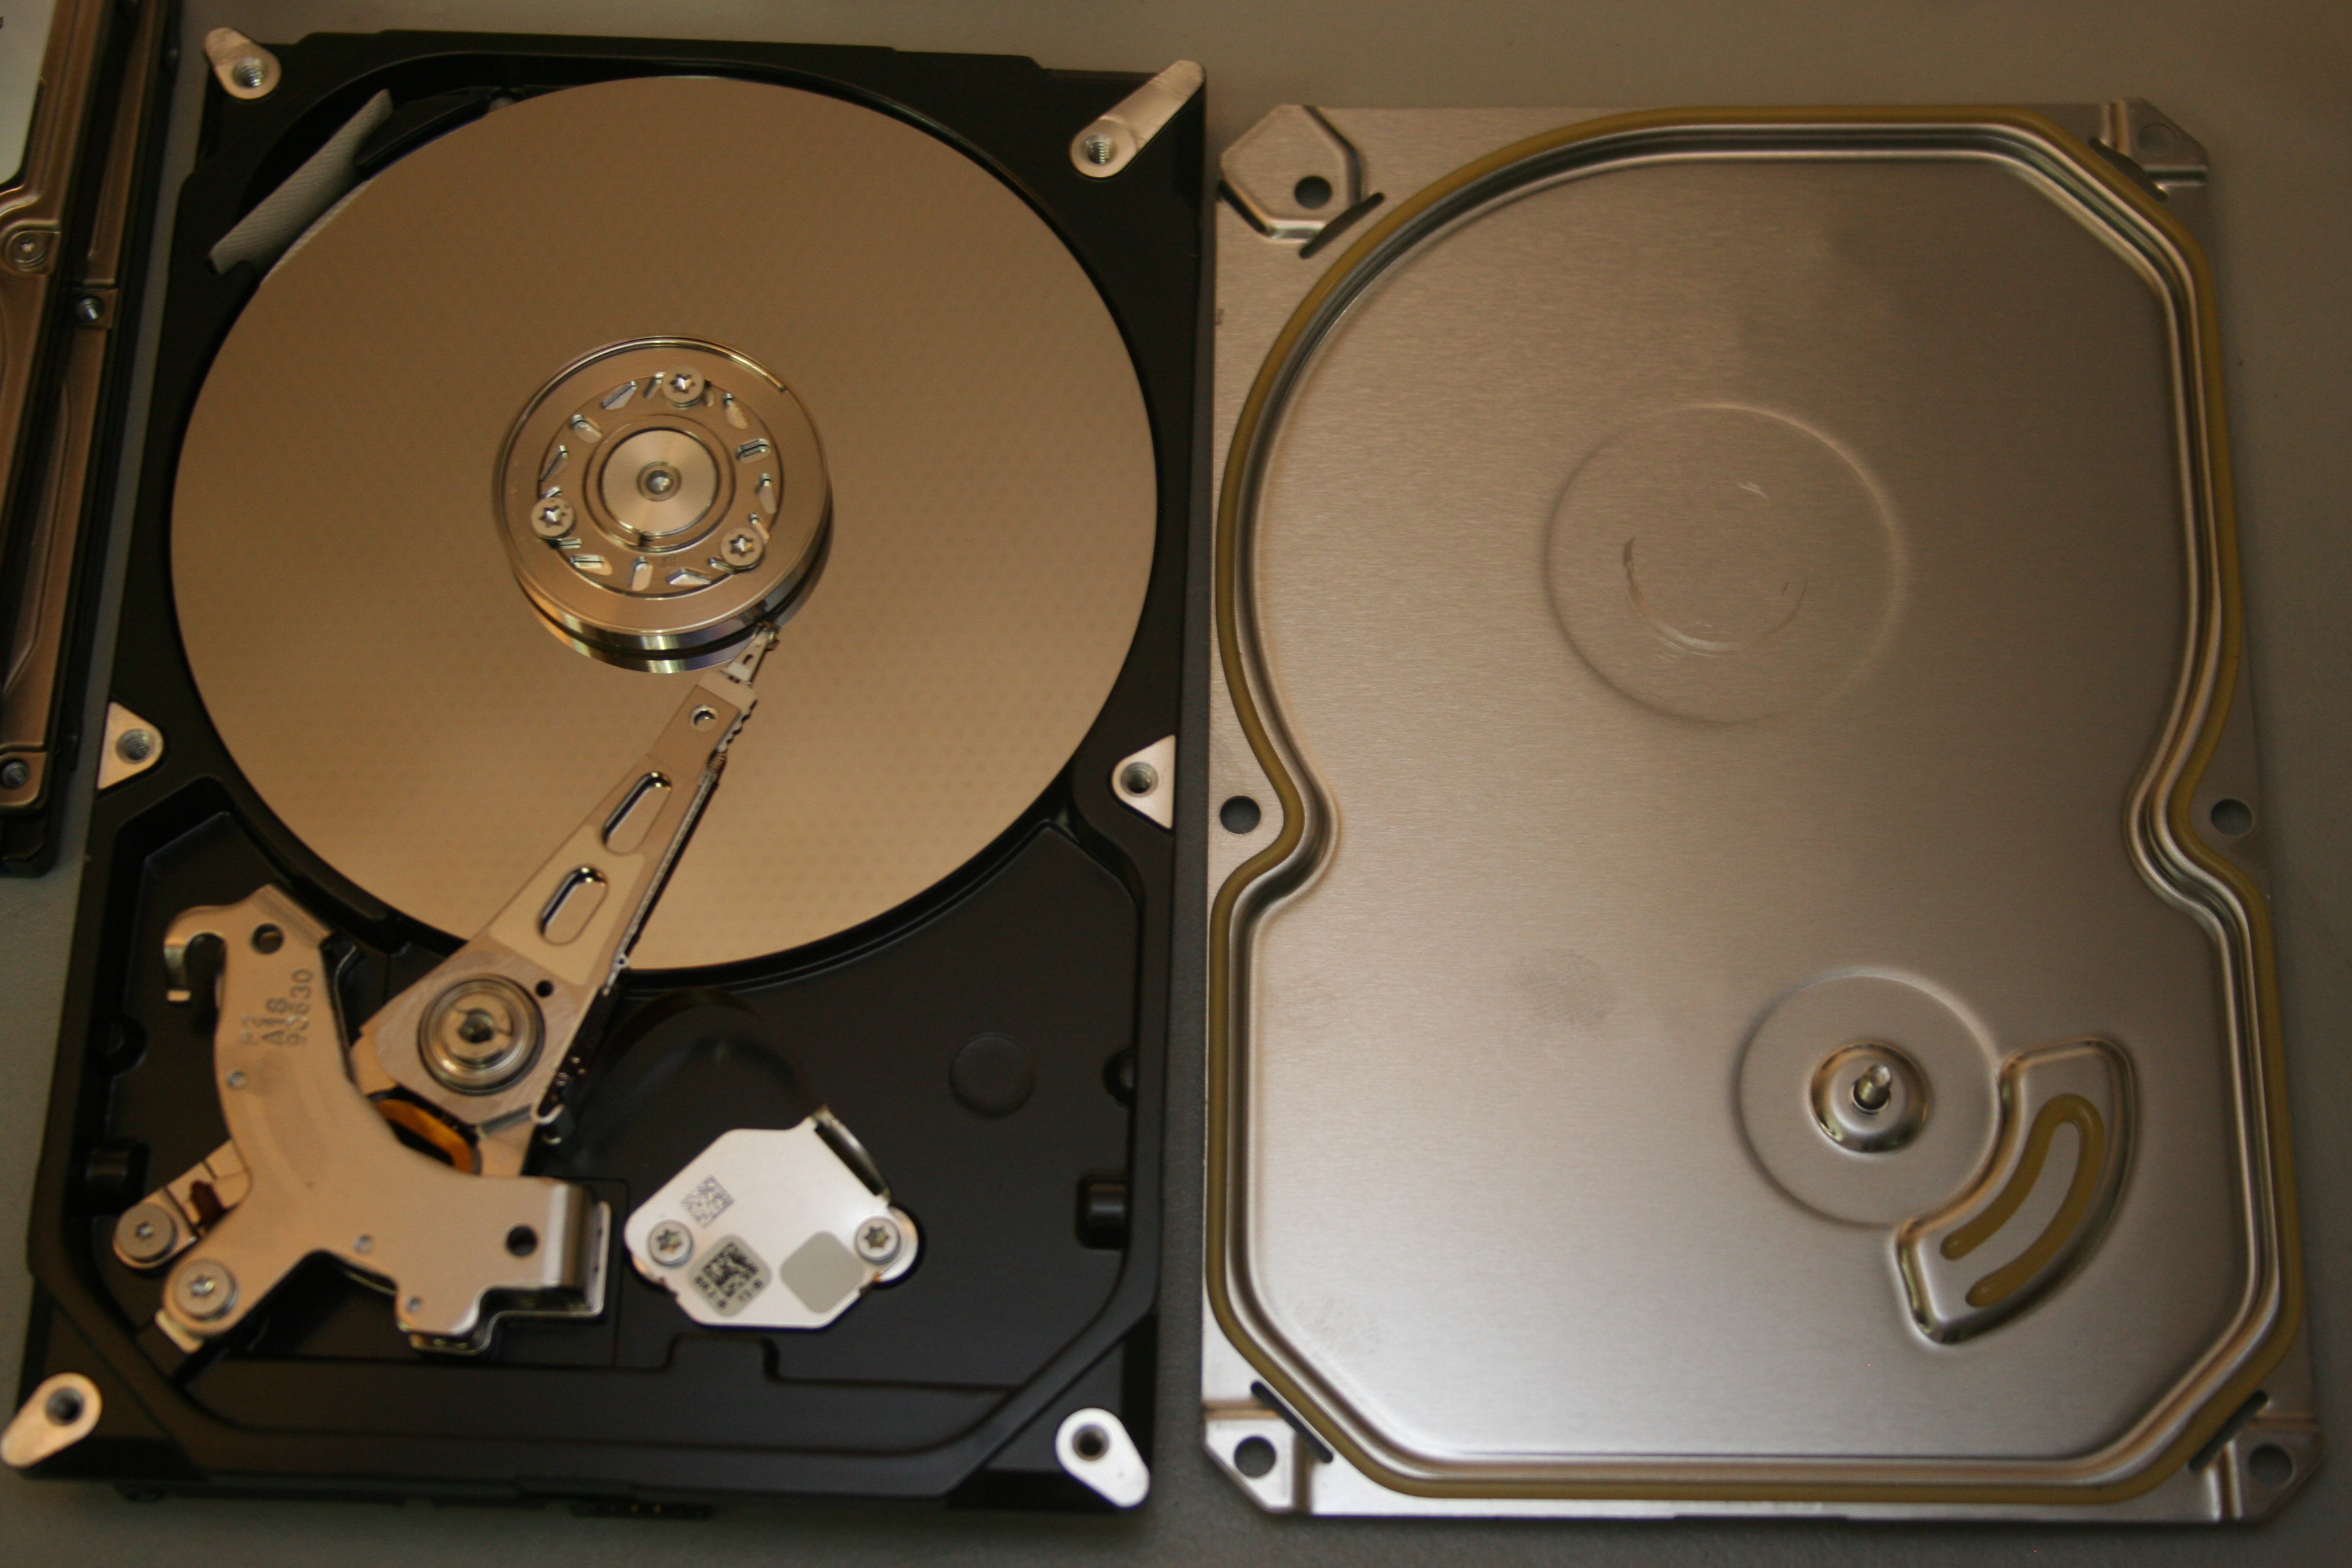 Clean Room Data Recovery Support Article Archives - RAID, NAS, Hard ...